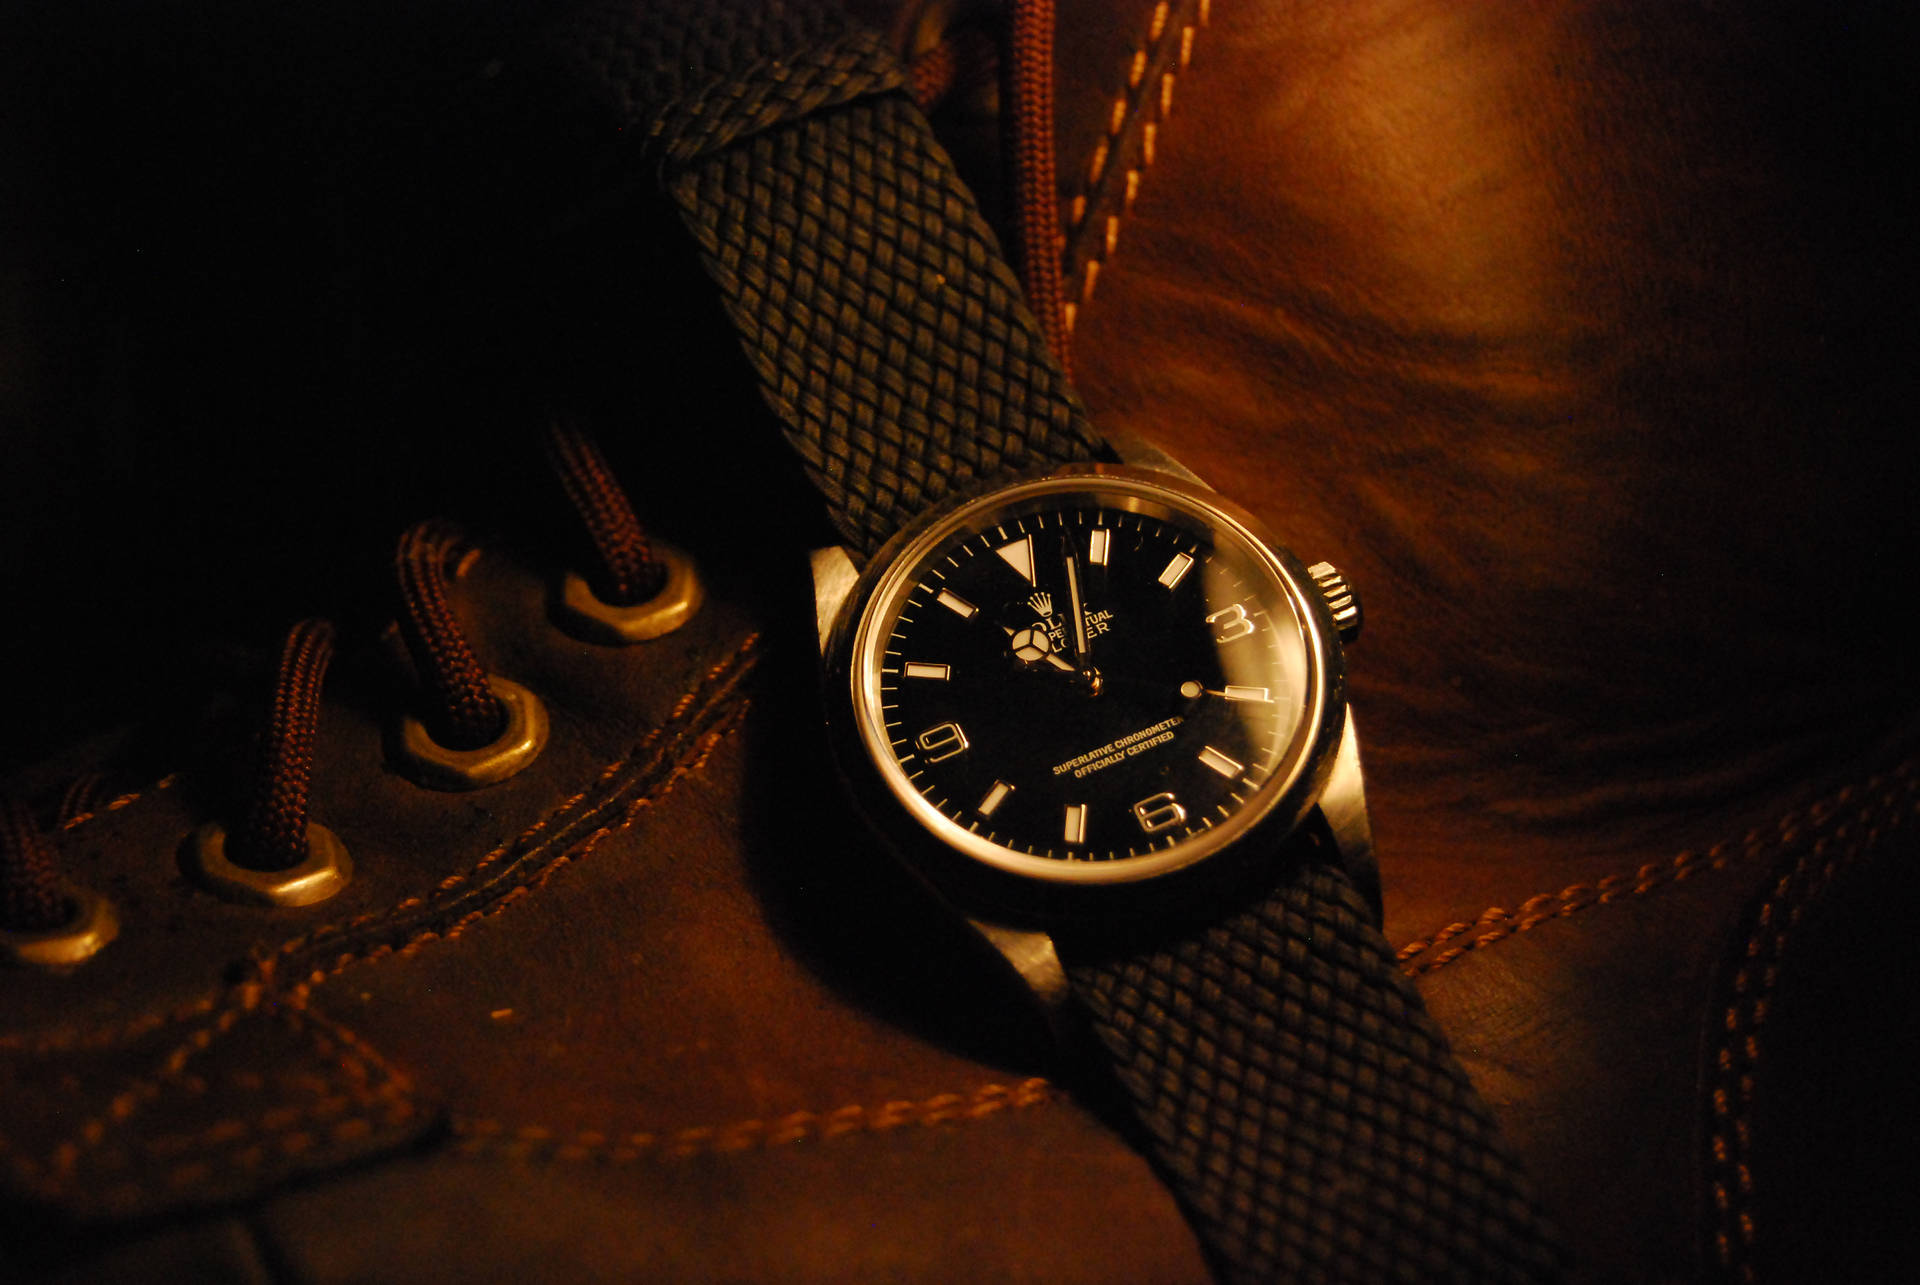 Rolex Watch And Boot